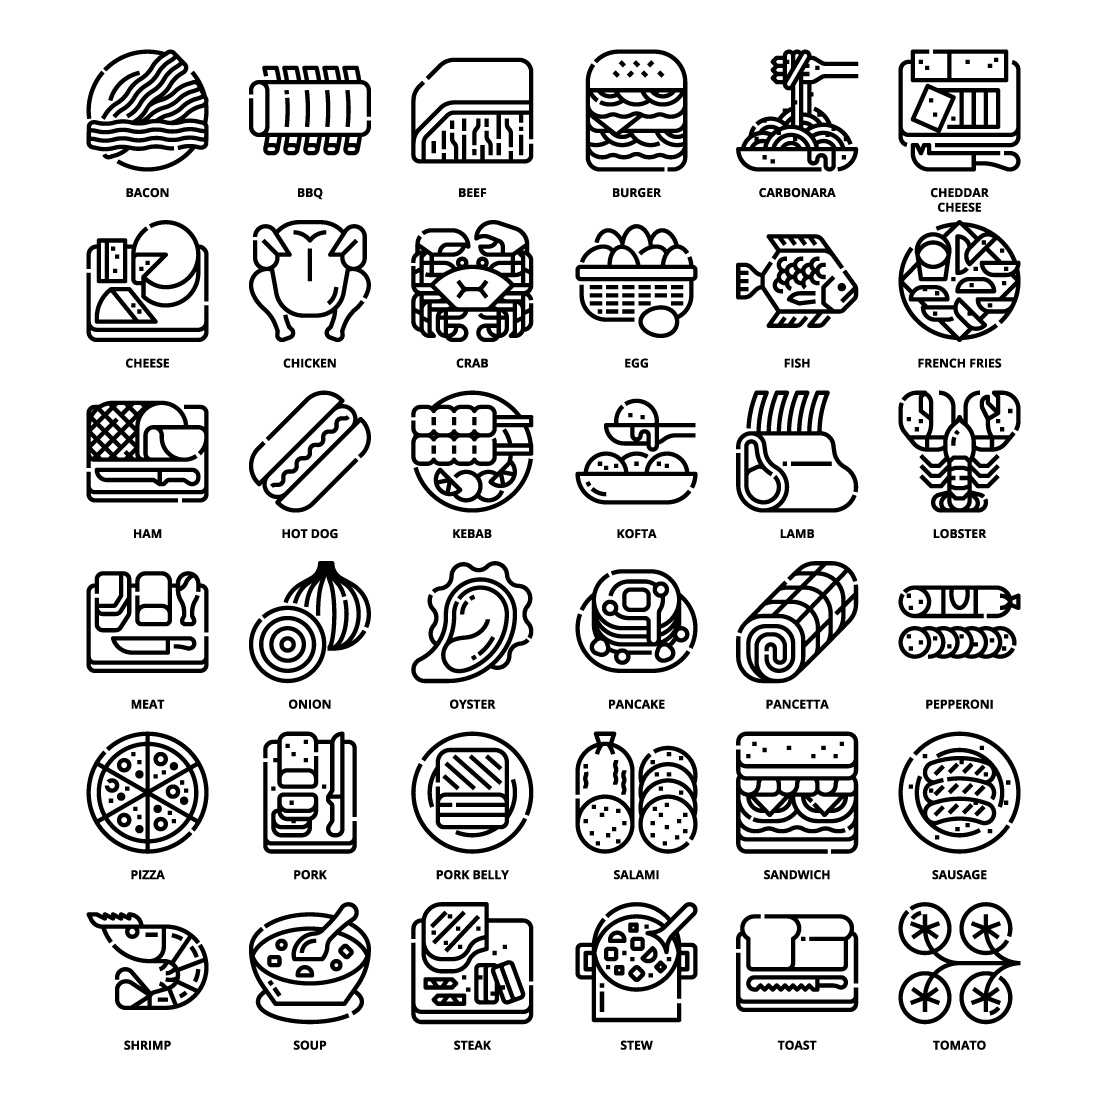 36 Foods Icons Set x 4 Styles preview image.